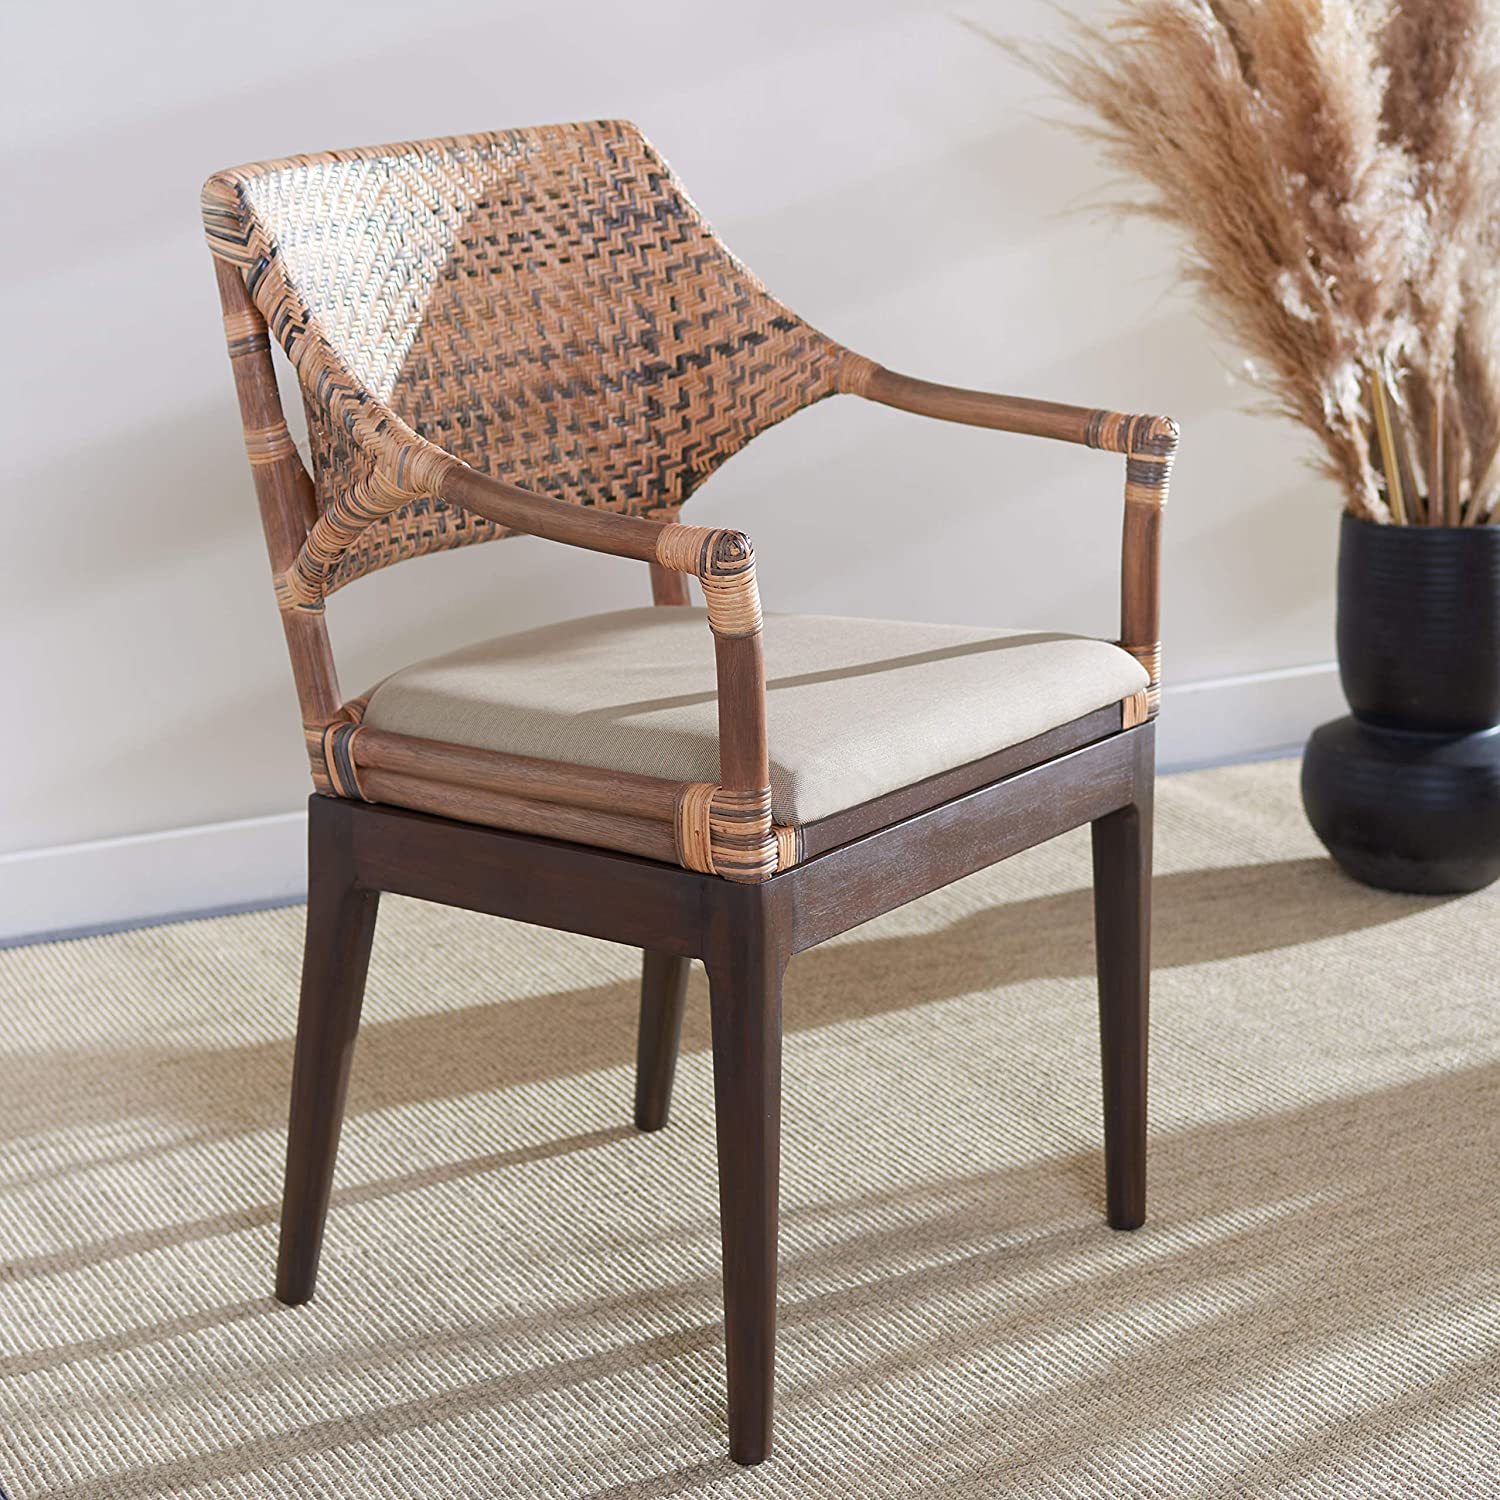 Carlo Arm Chair, Honey, From The Safavieh Home Collection. - $415.97